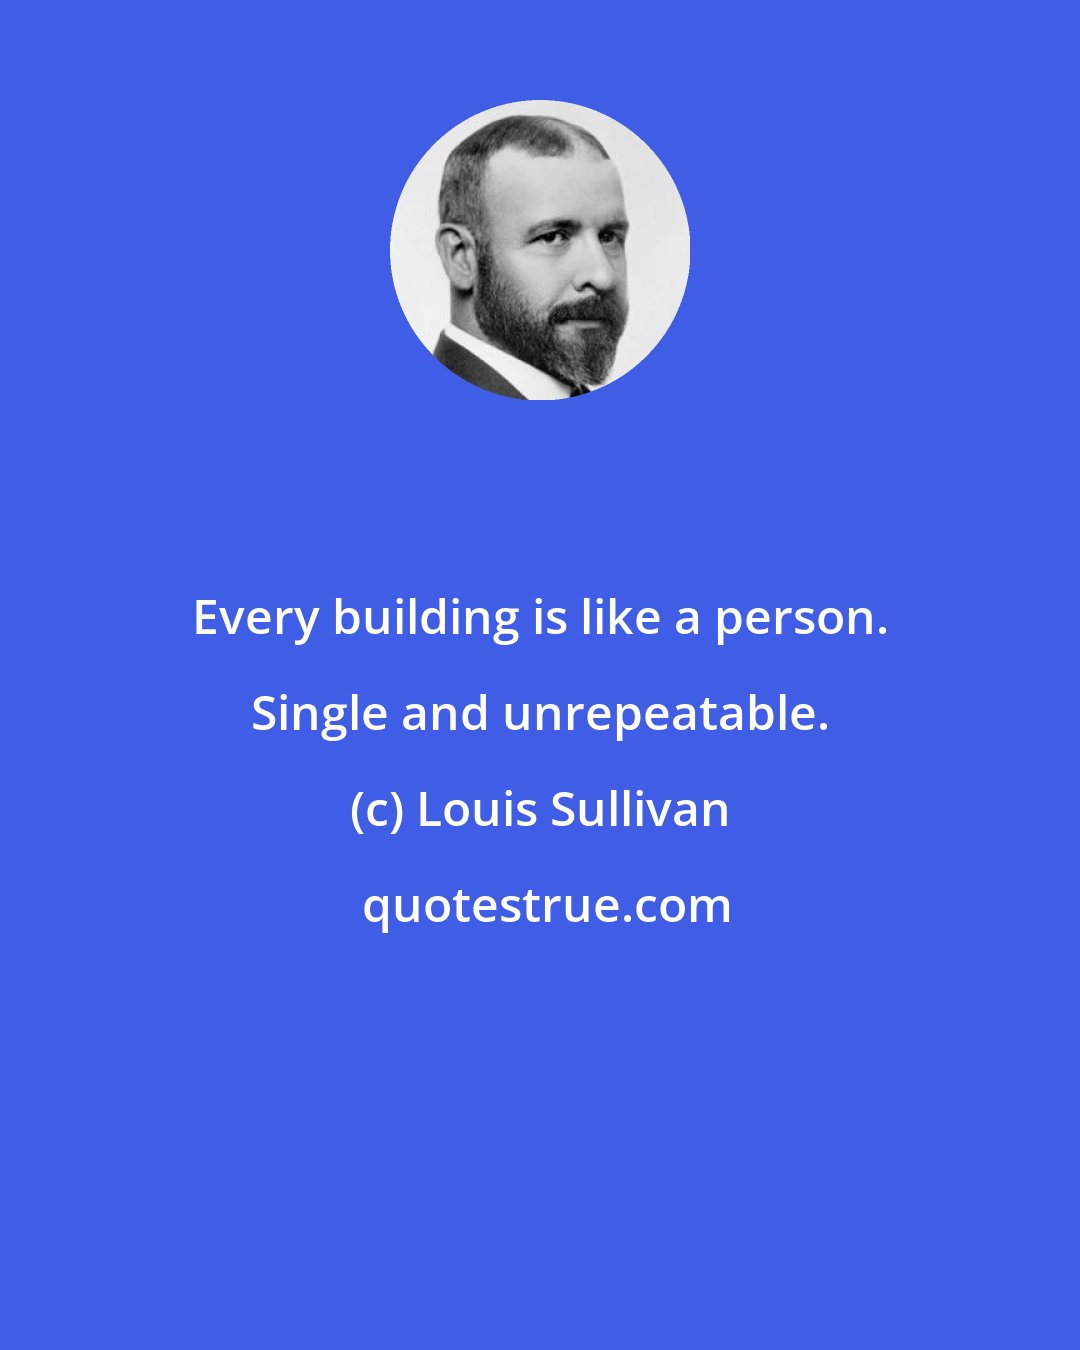 Louis Sullivan: Every building is like a person. Single and unrepeatable.